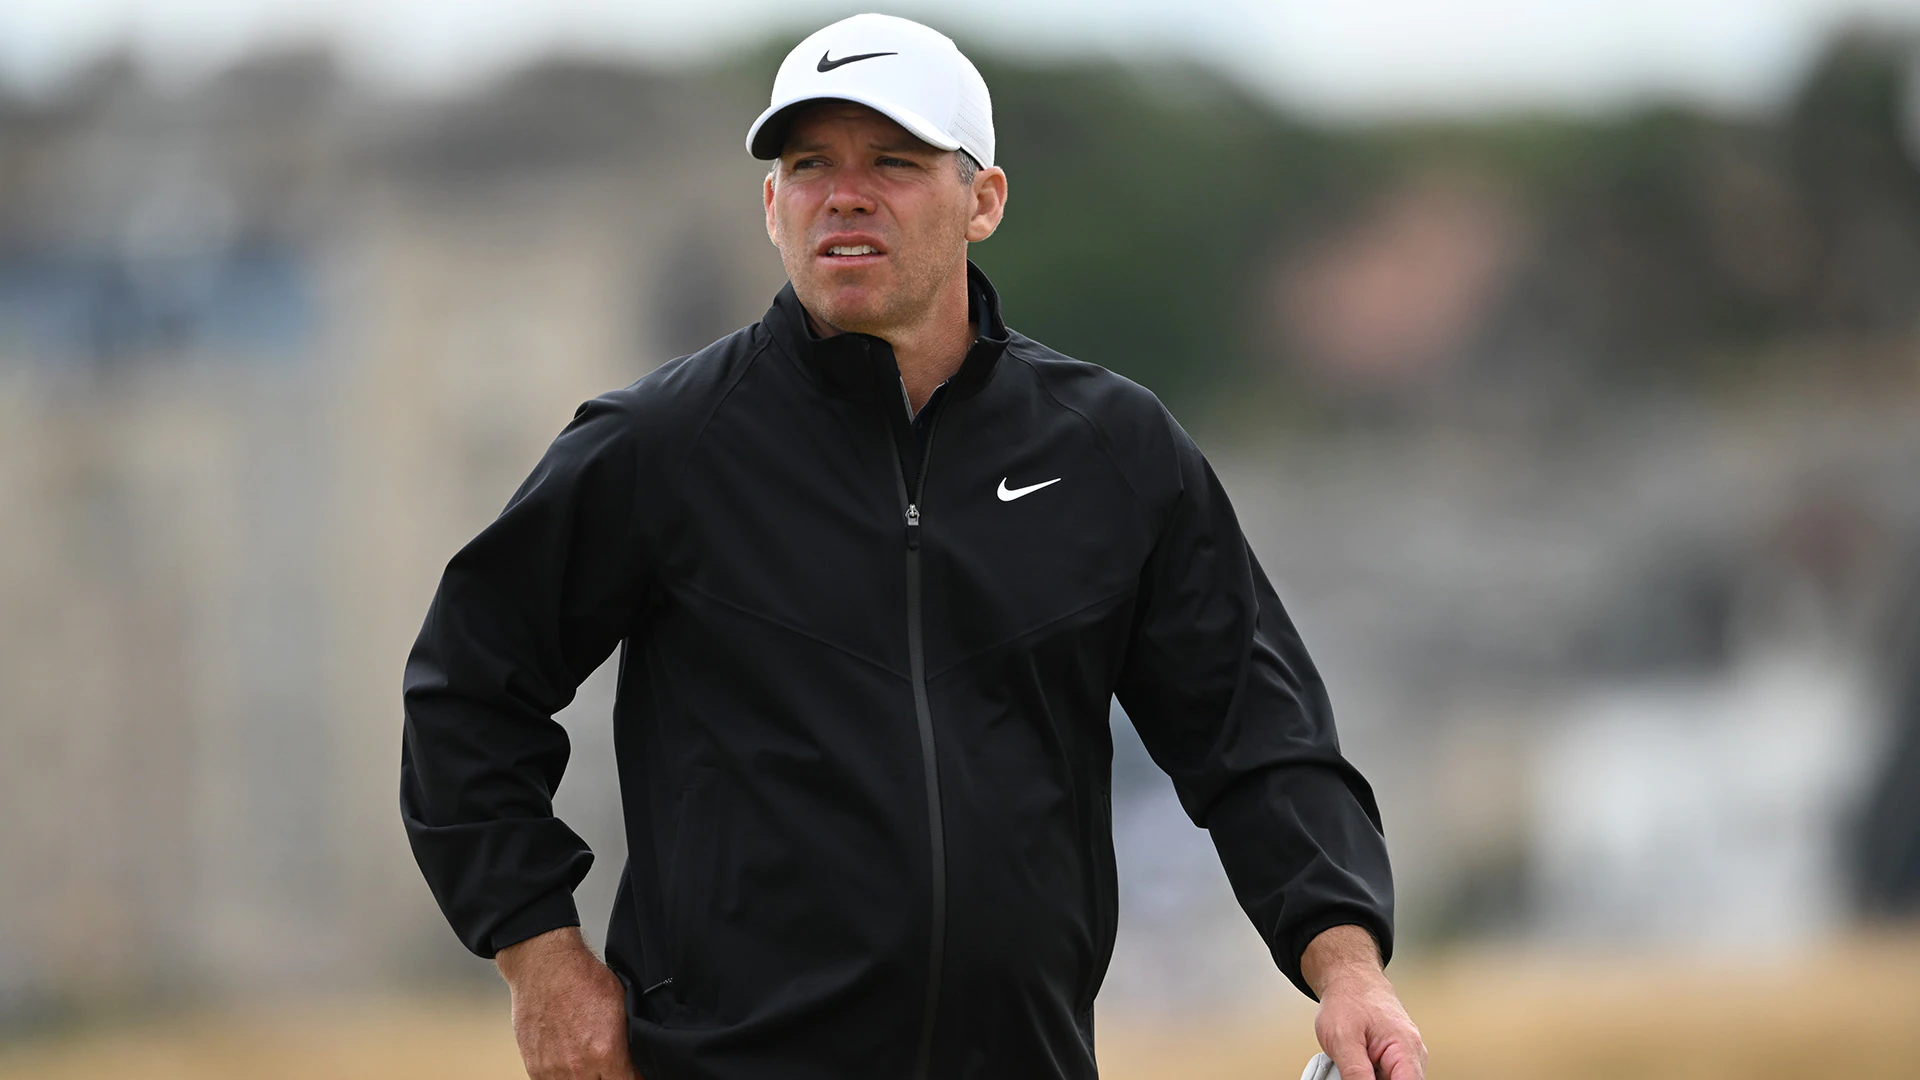 Paul Casey reveals his father is in ICU after bypass surgery this week in London